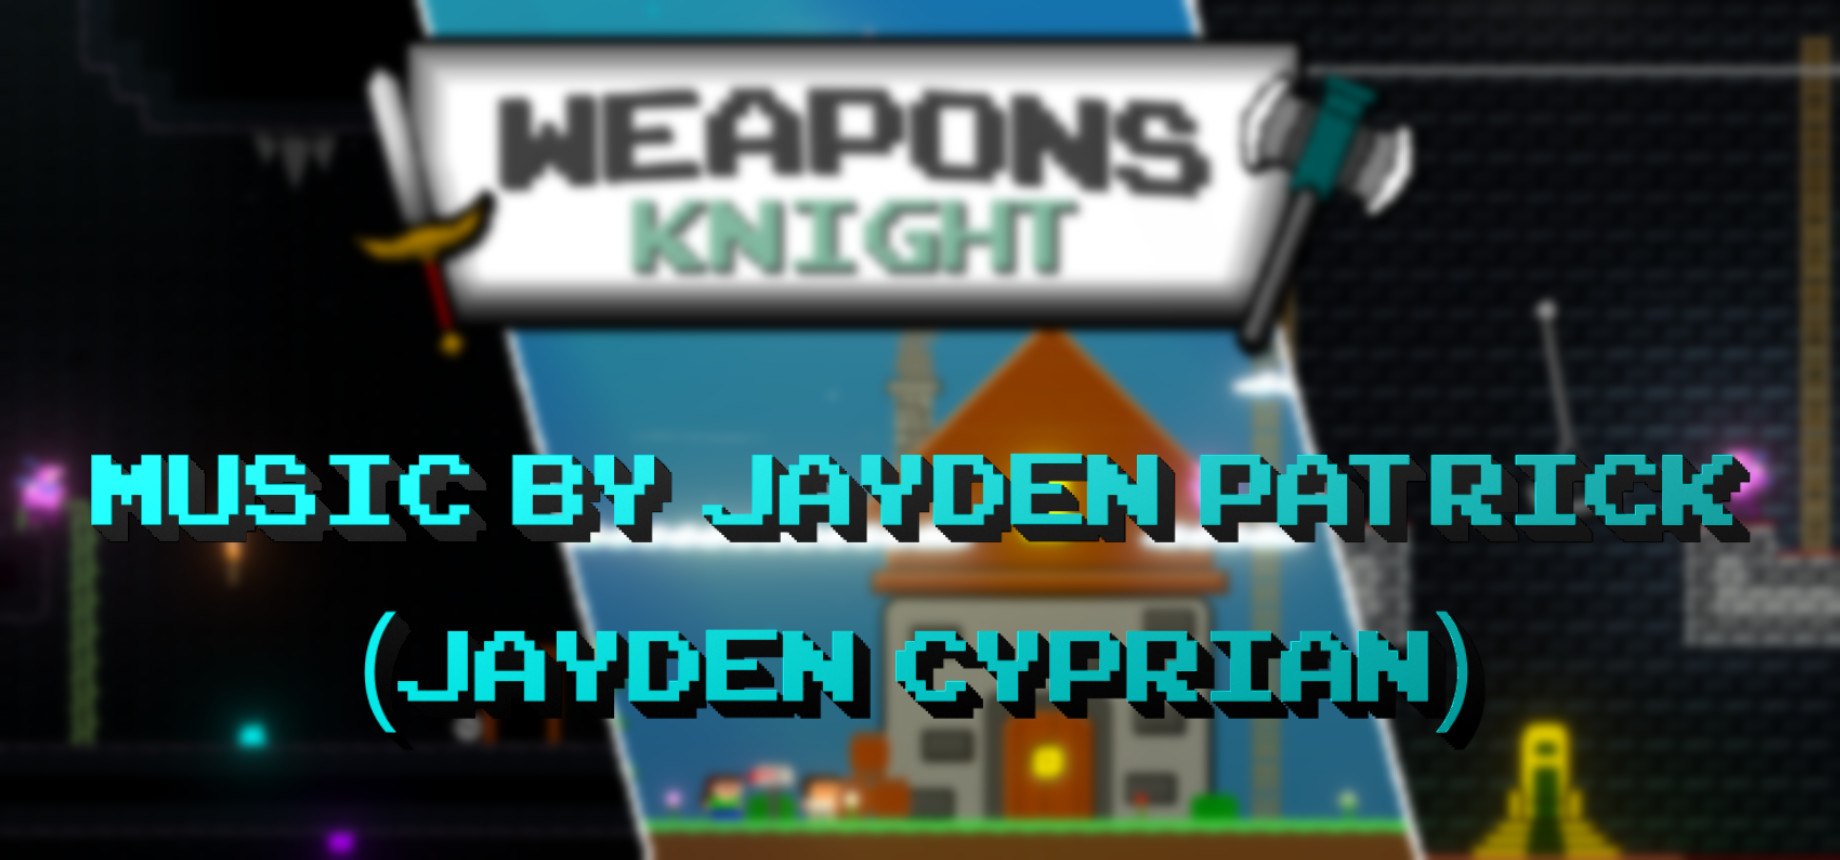 Weapons Knight - Official Soundtrack Featured Screenshot #1